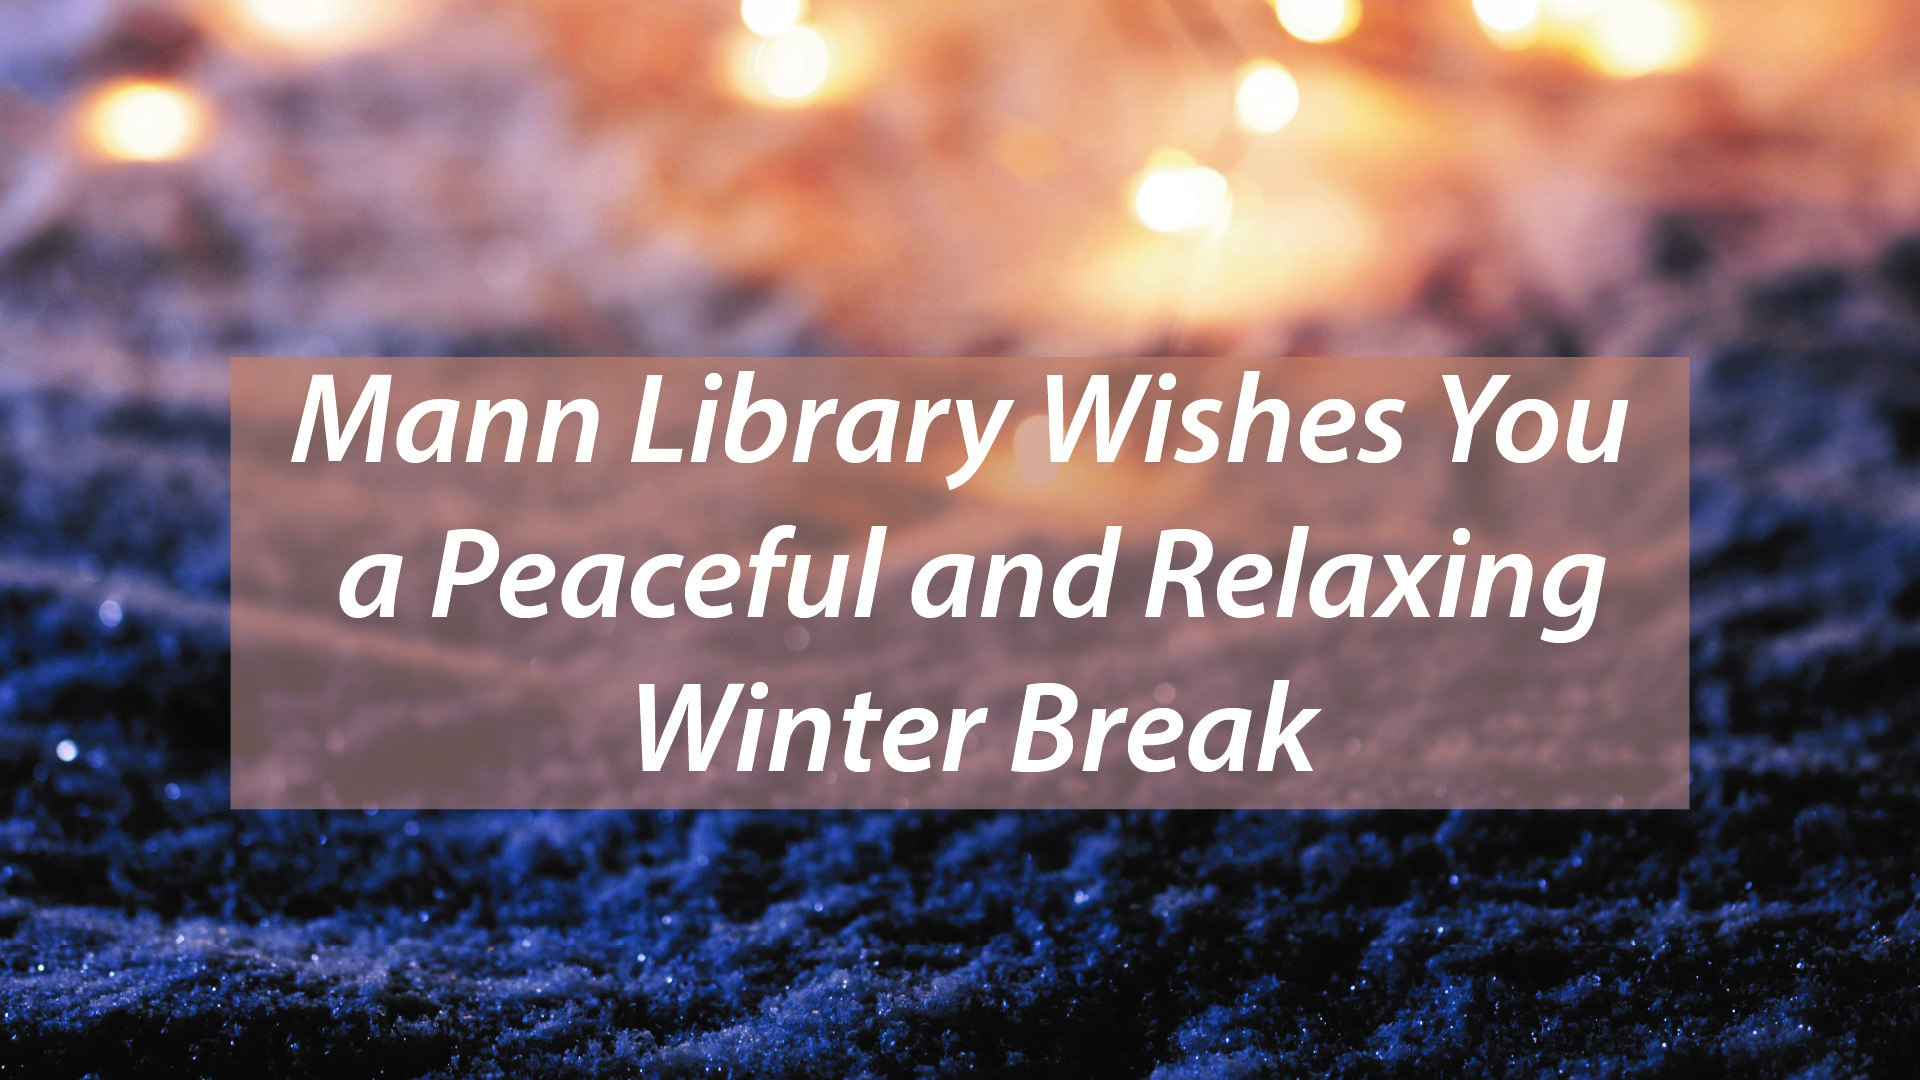 Image of snow, with text: Mann Library Wishes You a Peaceful and Relaxing Winter Break